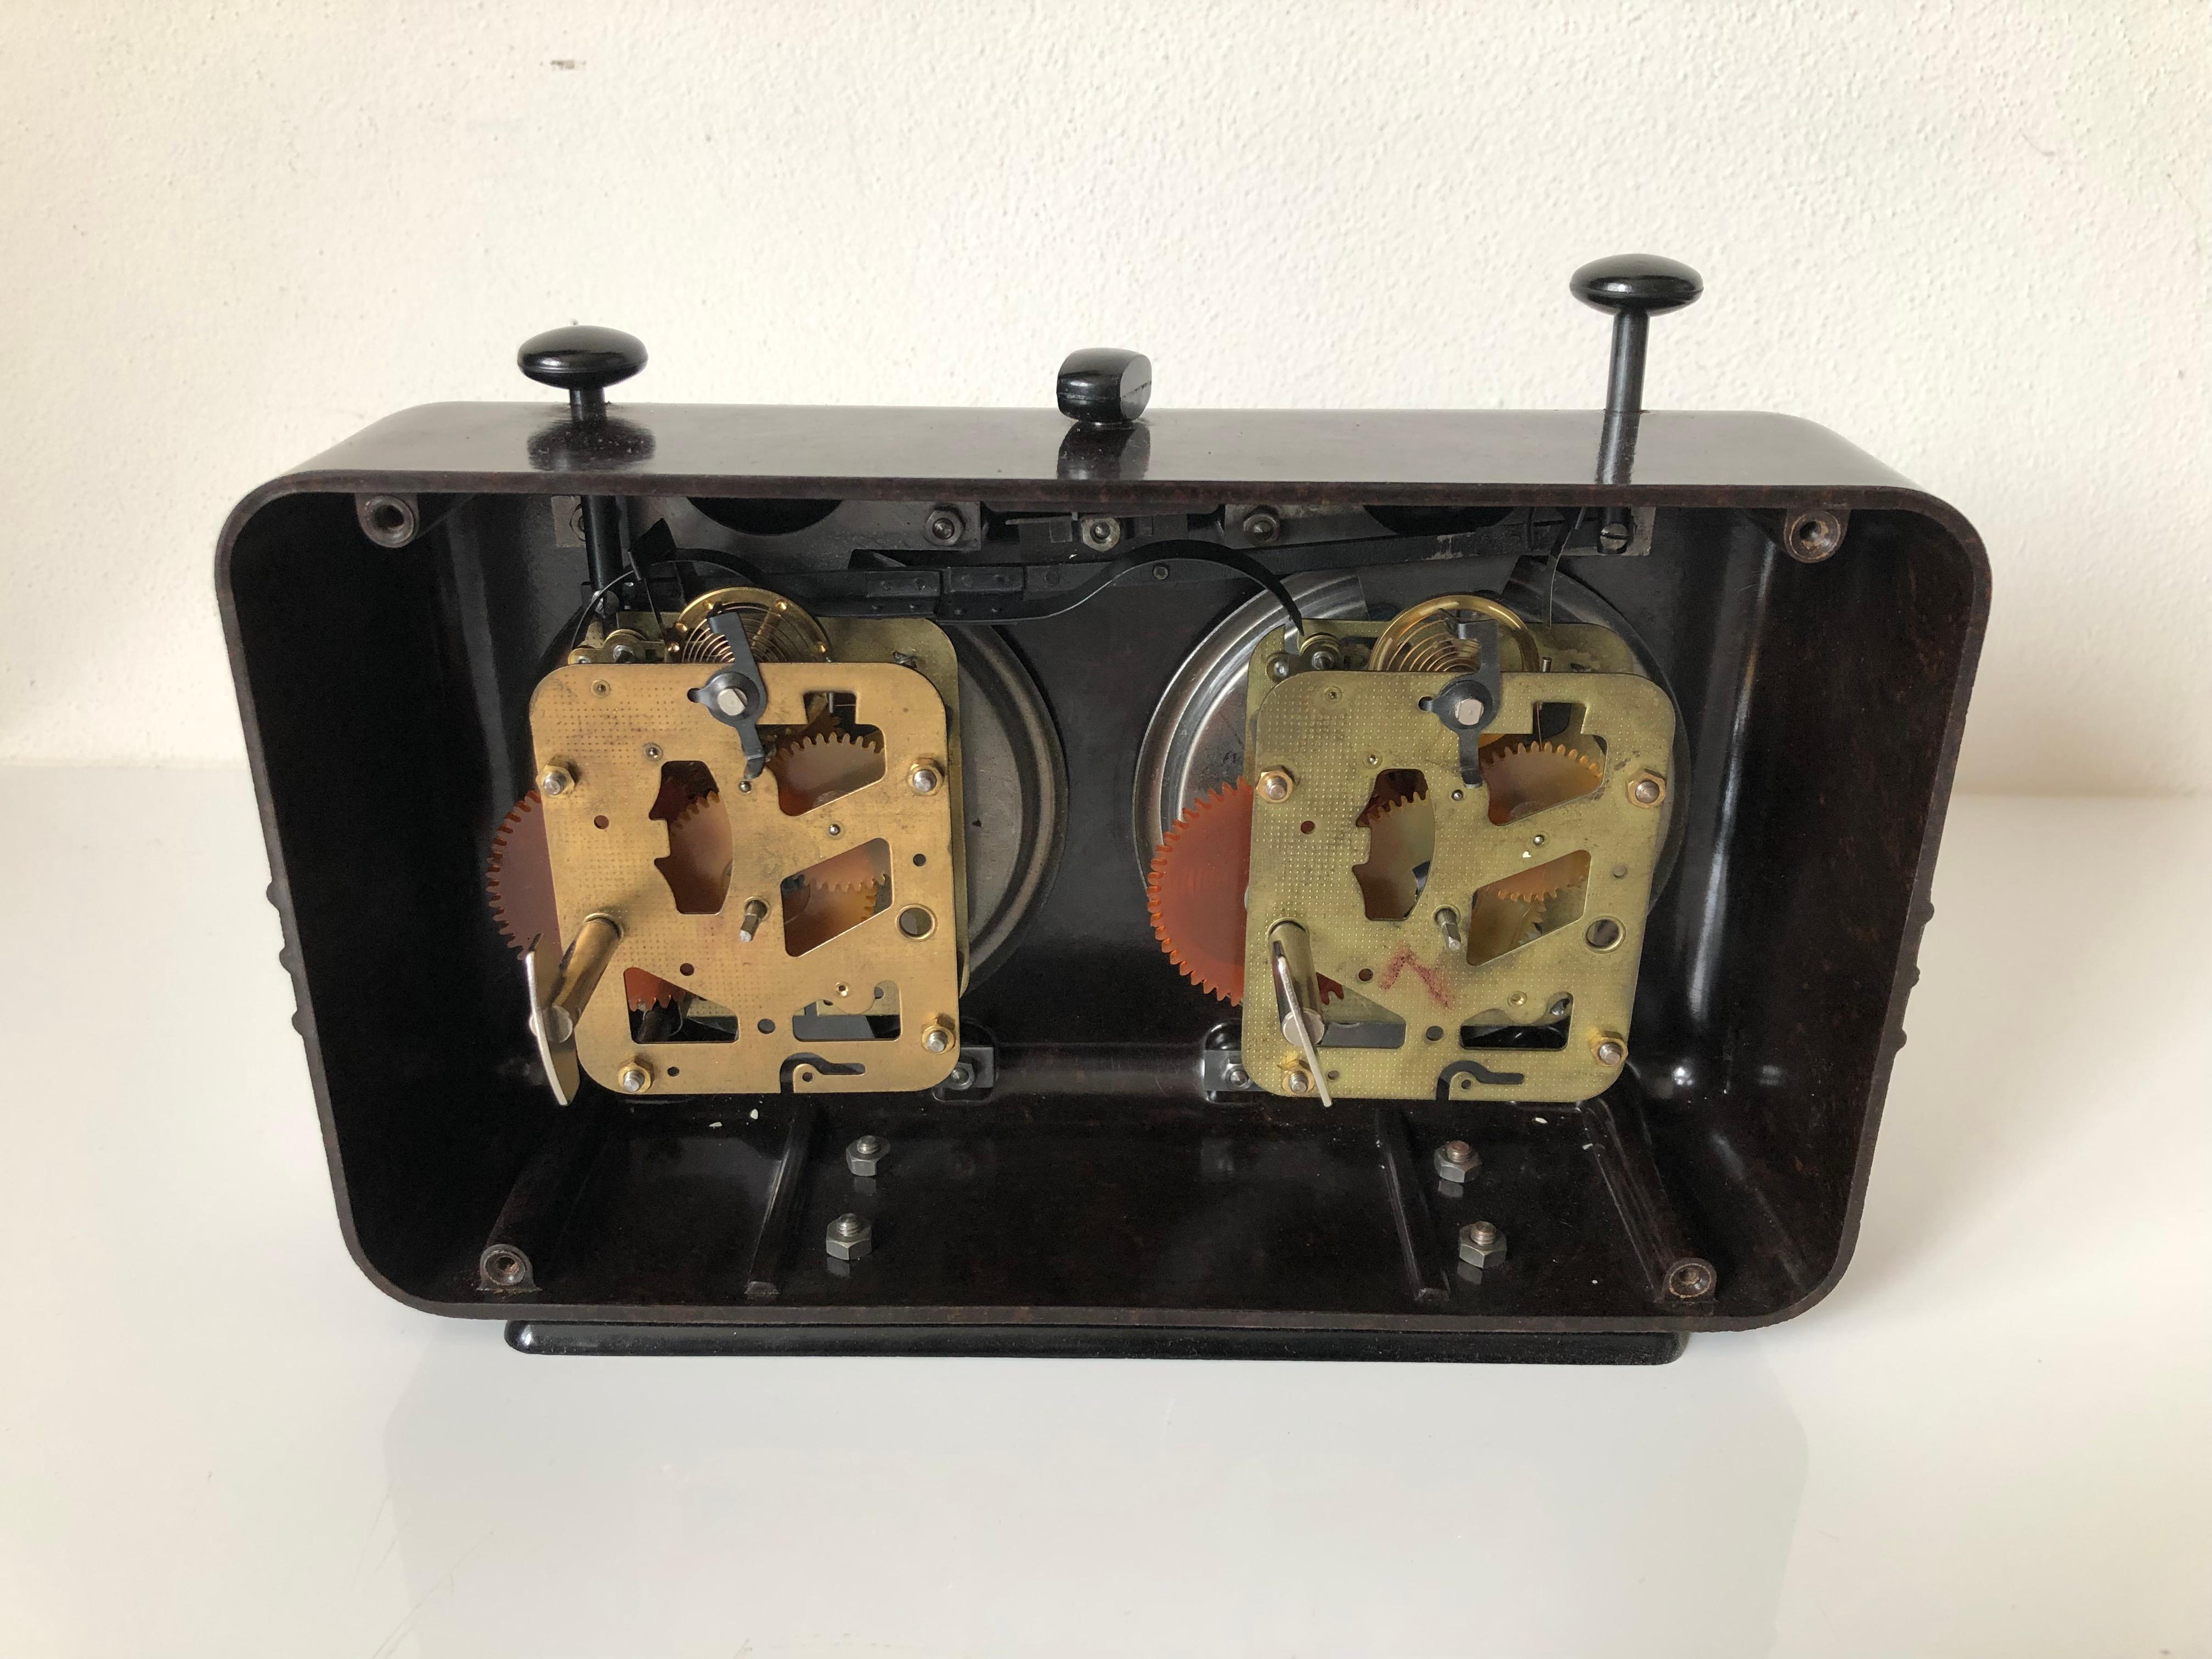 - Bakelite chess clock timer by Chronotechna Czechoslovakia
- Good original condition
- Both mechanic movements is in fully working condition.